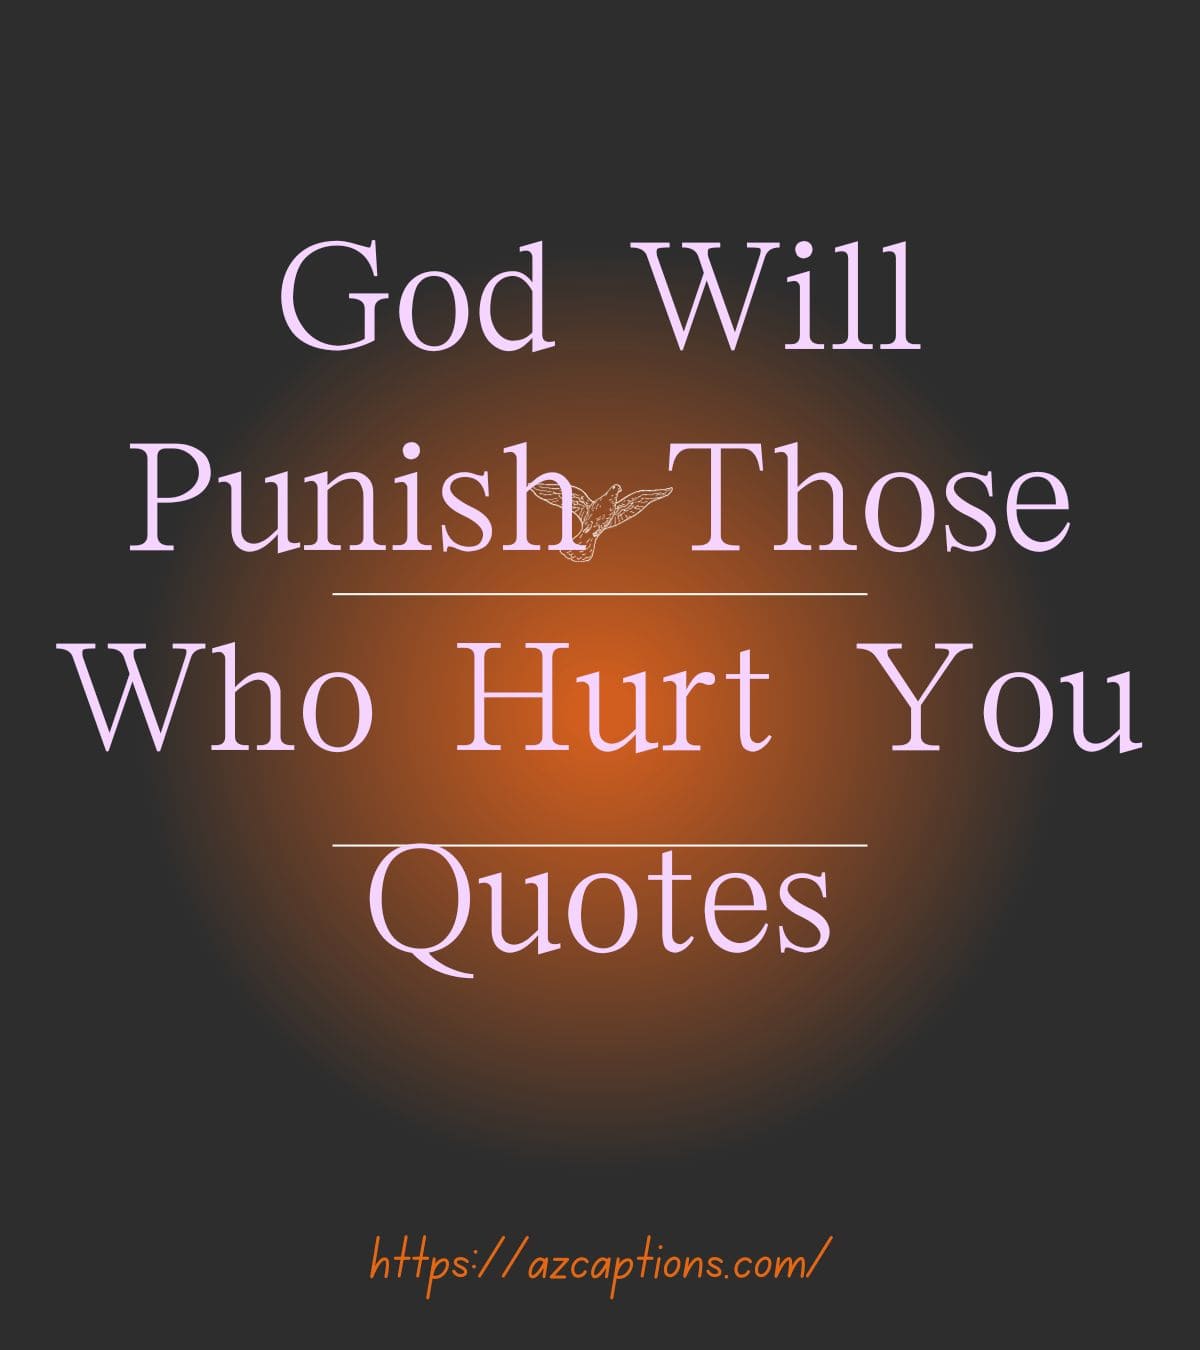 God Will Punish Those Who Hurt You Quotes